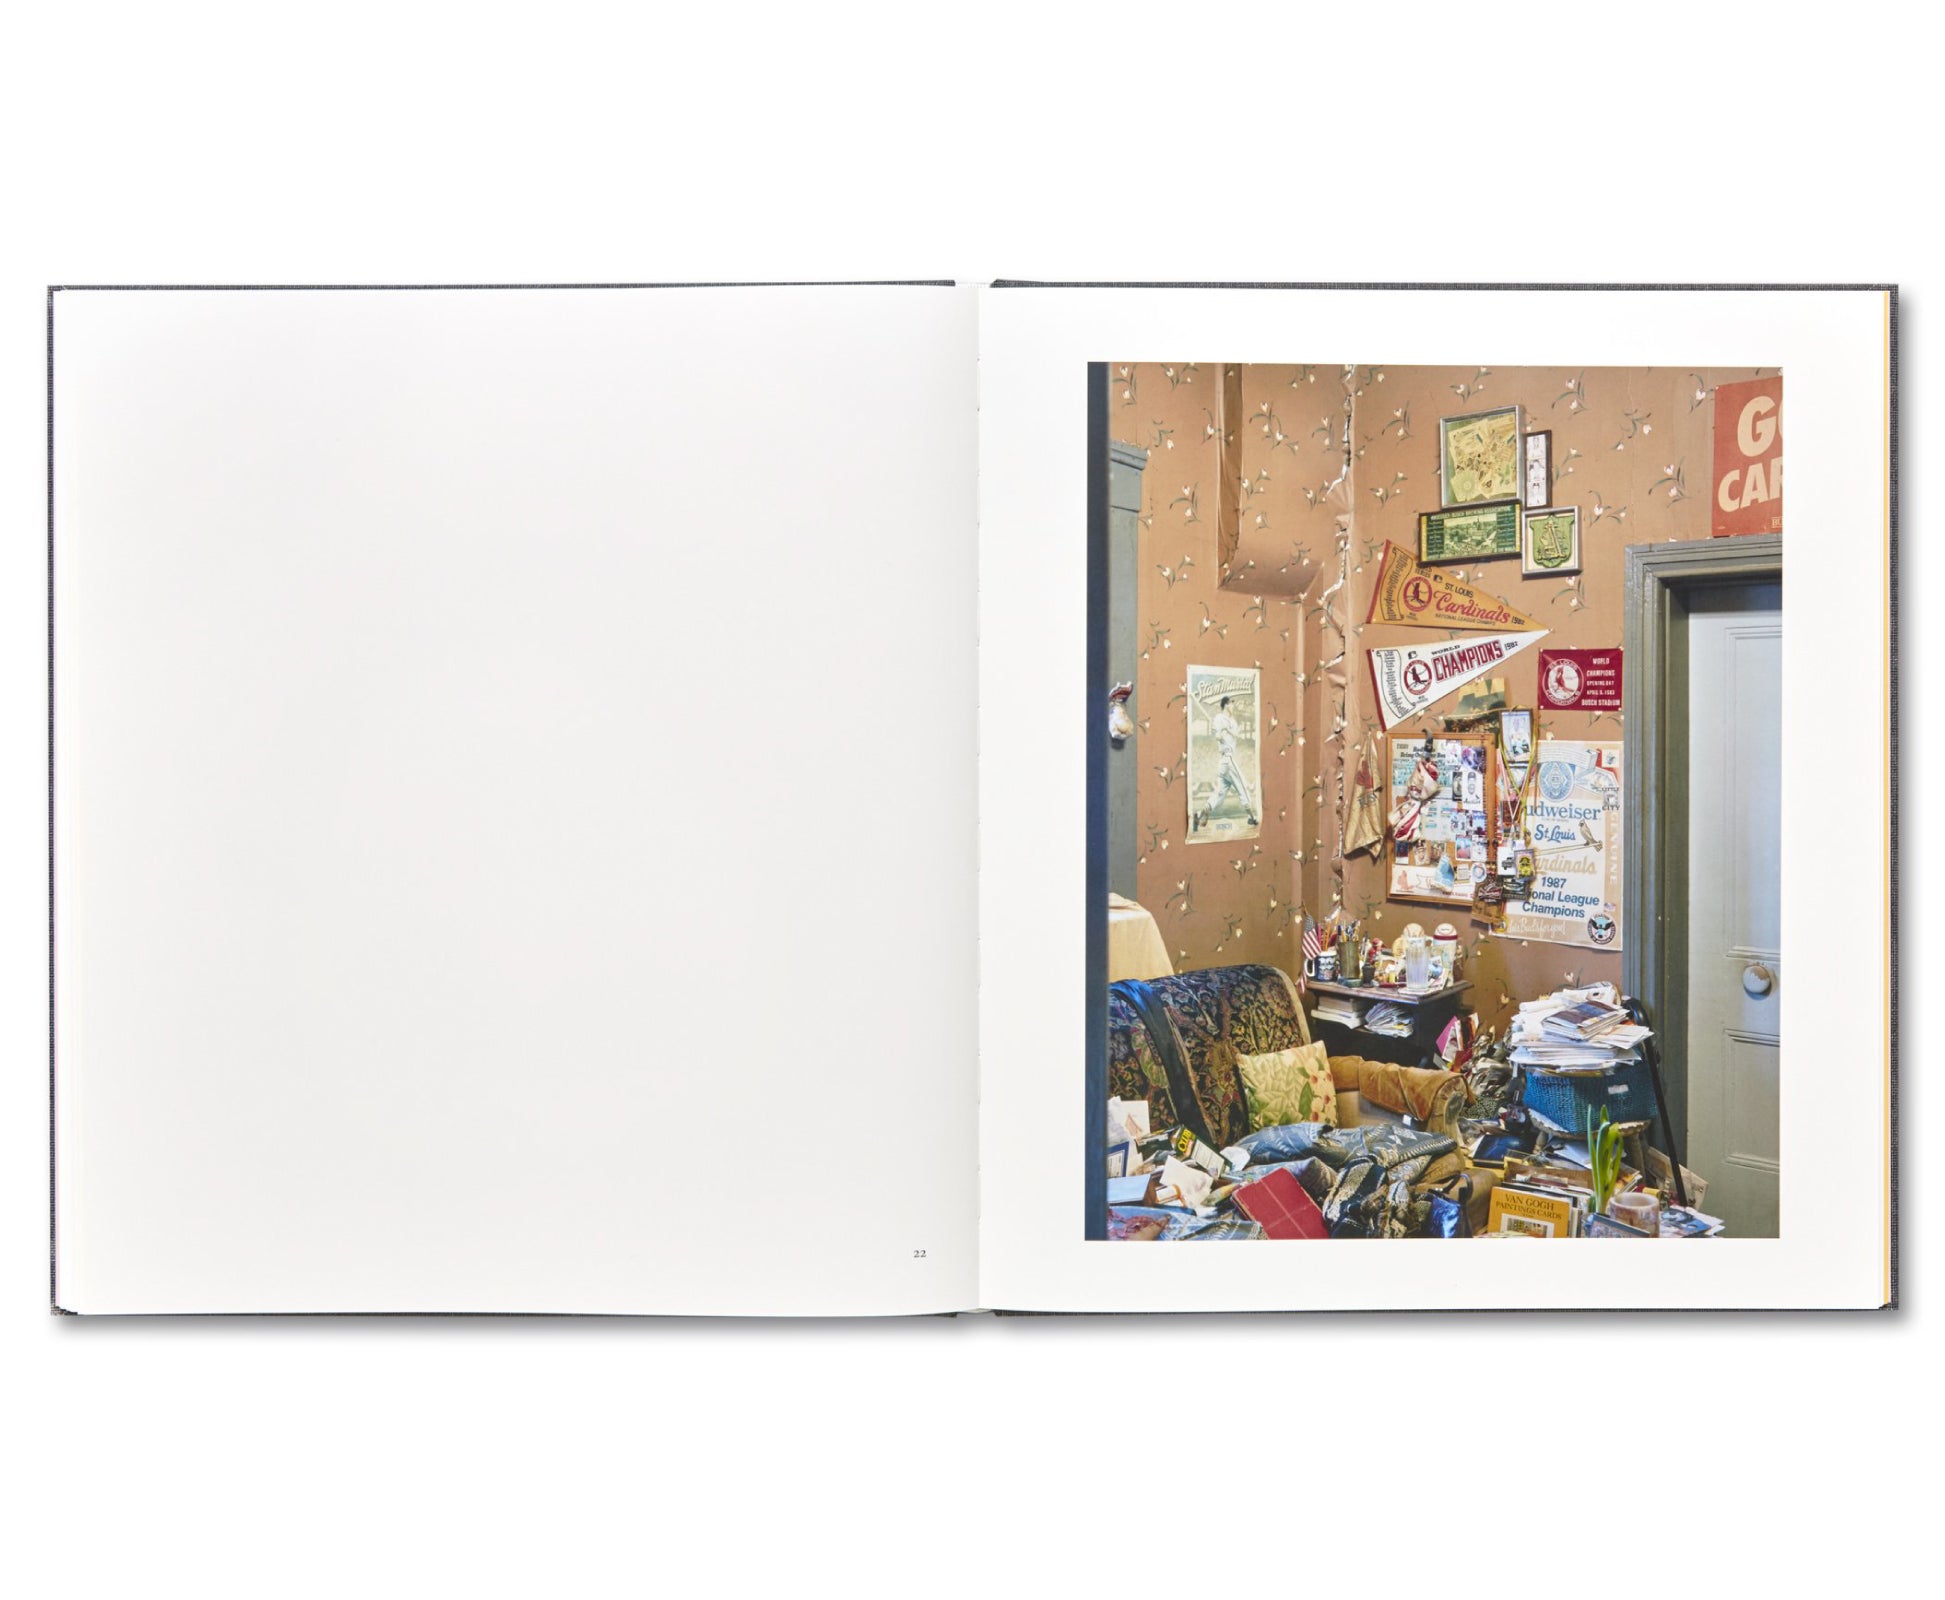 I KNOW HOW FURIOUSLY YOUR HEART IS BEATING by Alec Soth [SPECIAL EDITION (B)]